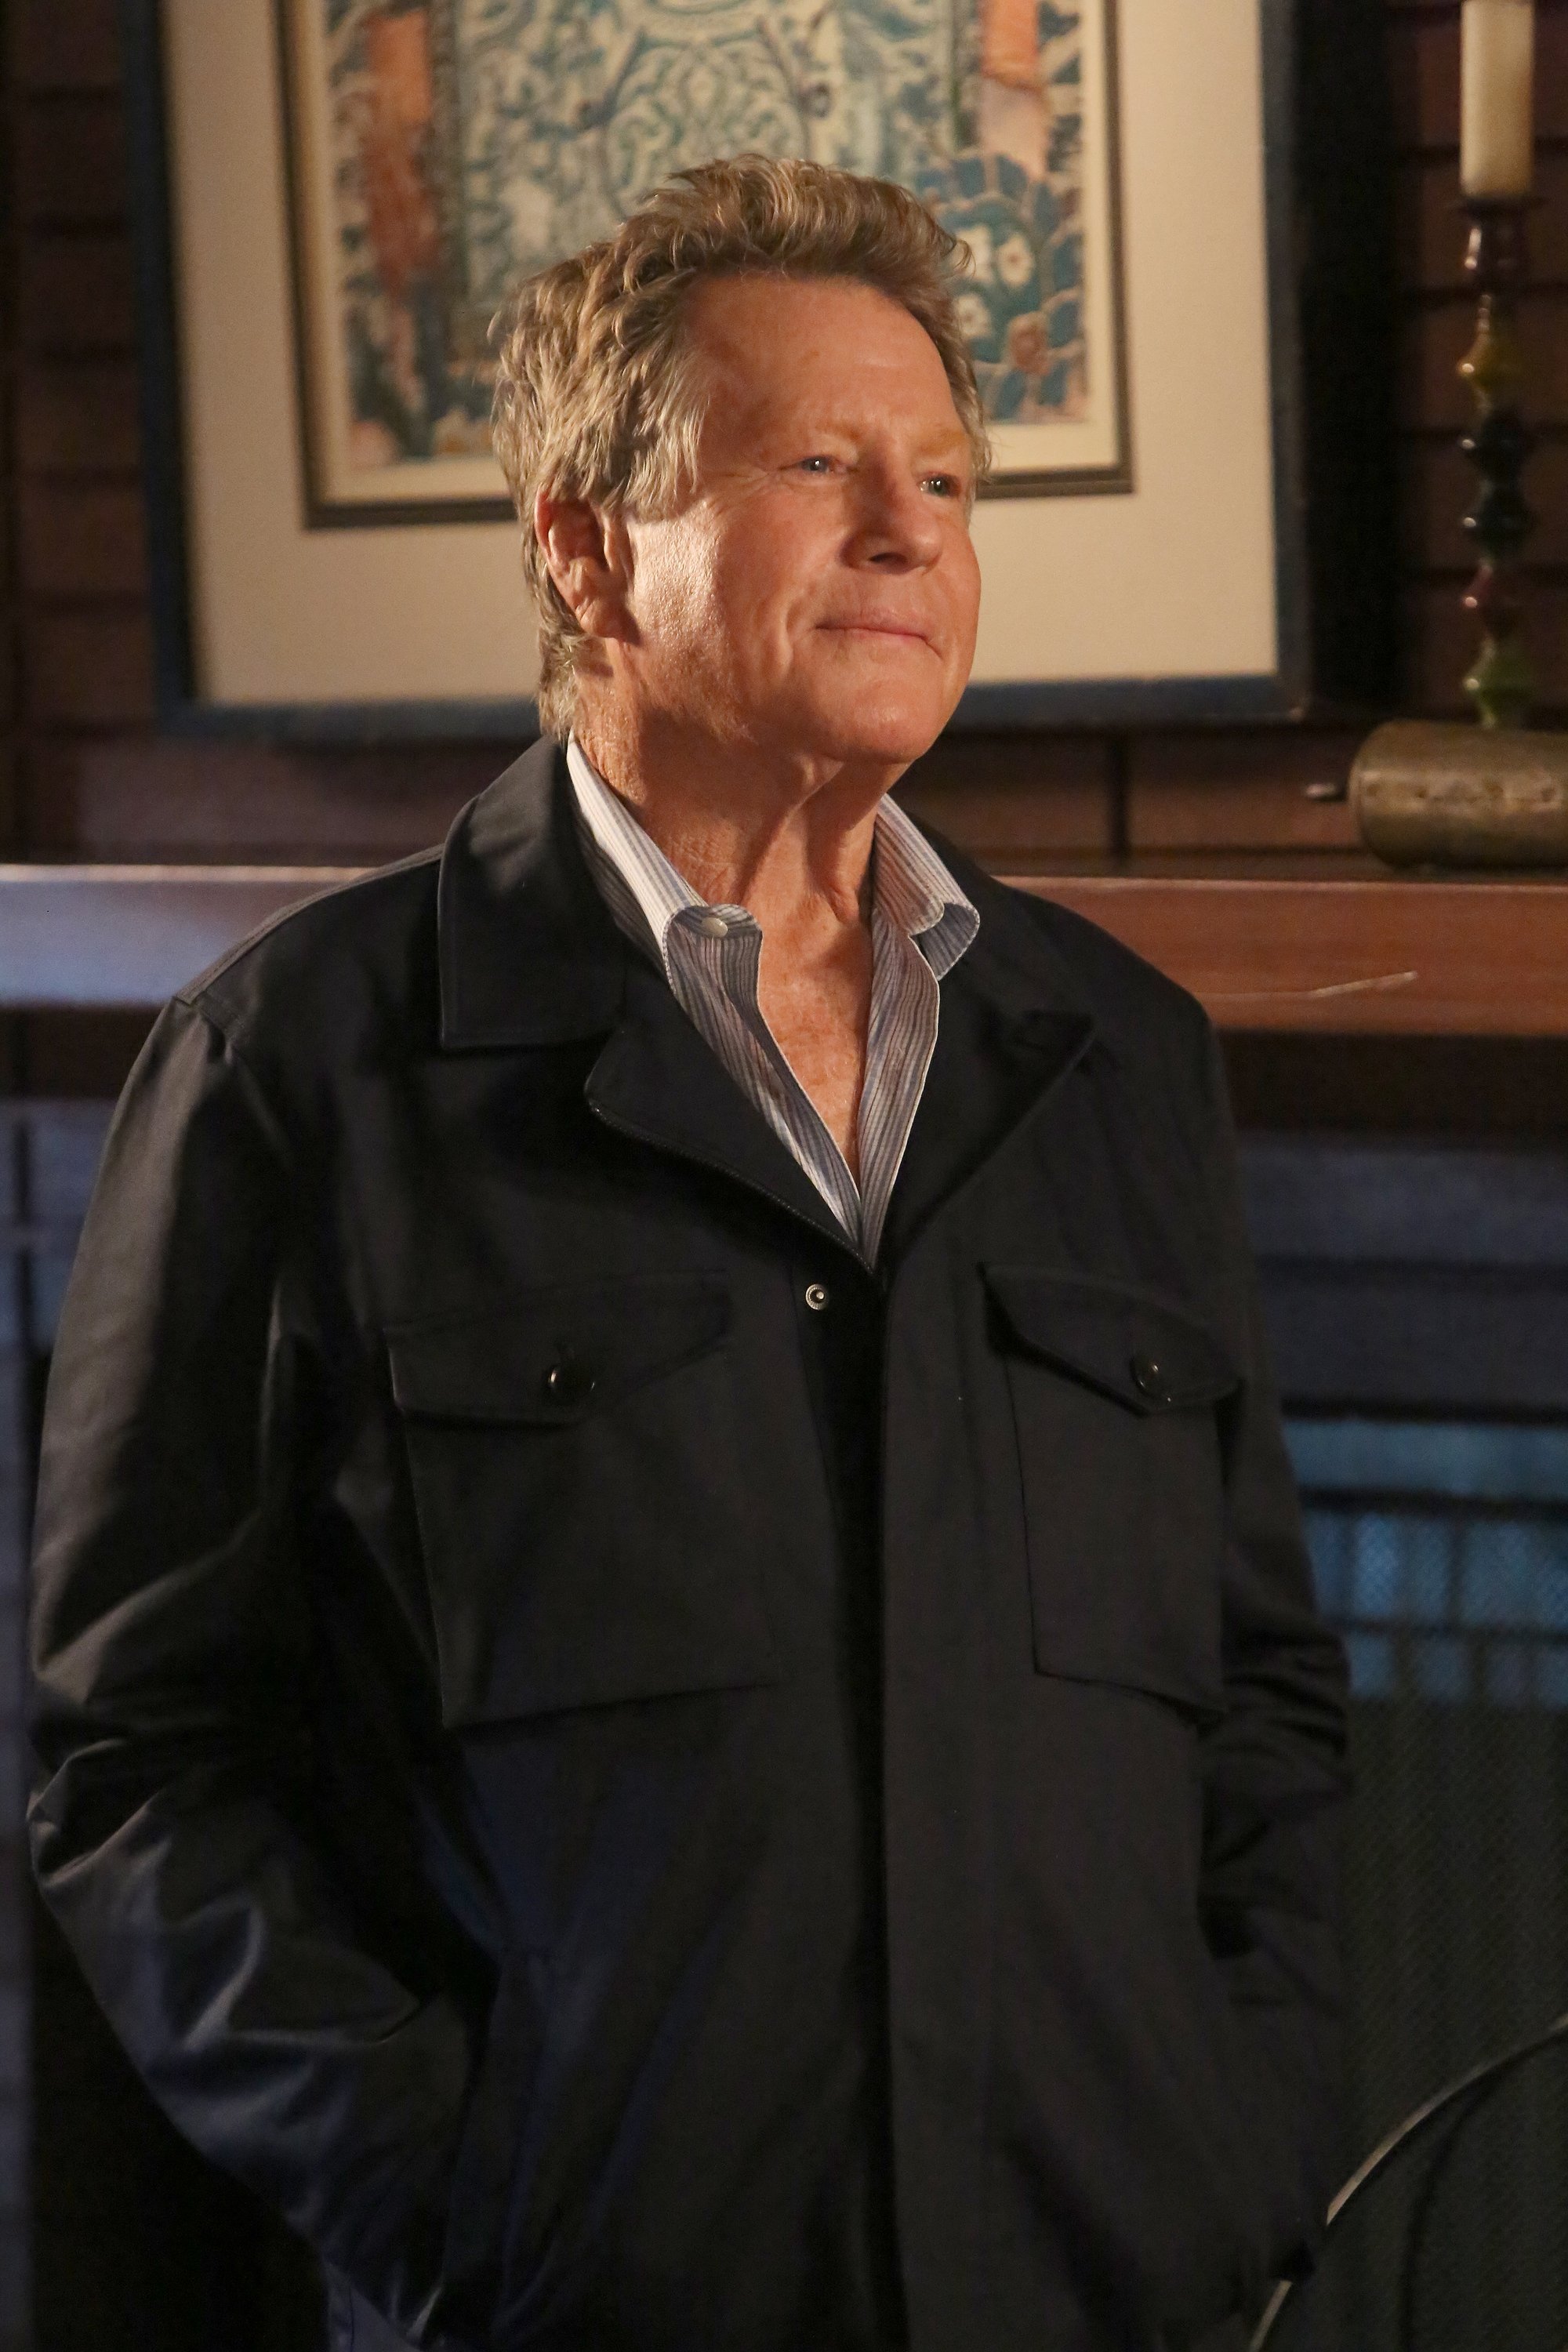 Ryan O'Neal as a guest star in the "The Brain in the Bot" episode of BONES in 2016 | Source: Getty Images